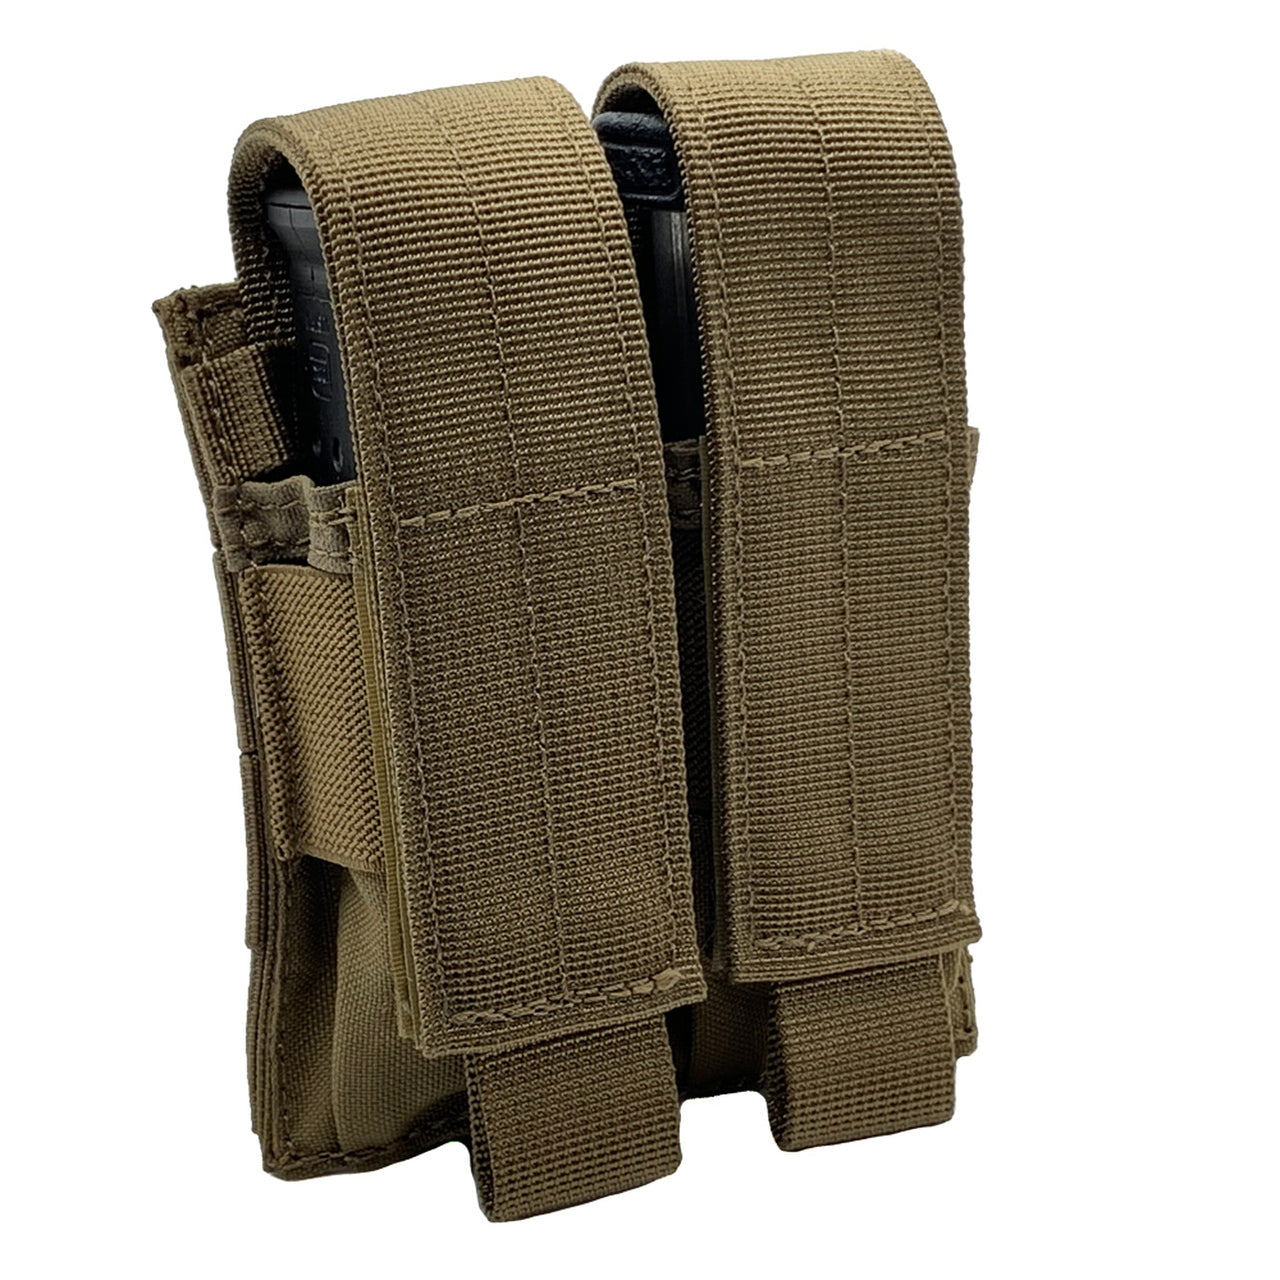 Shellback Tactical double mag pouch.